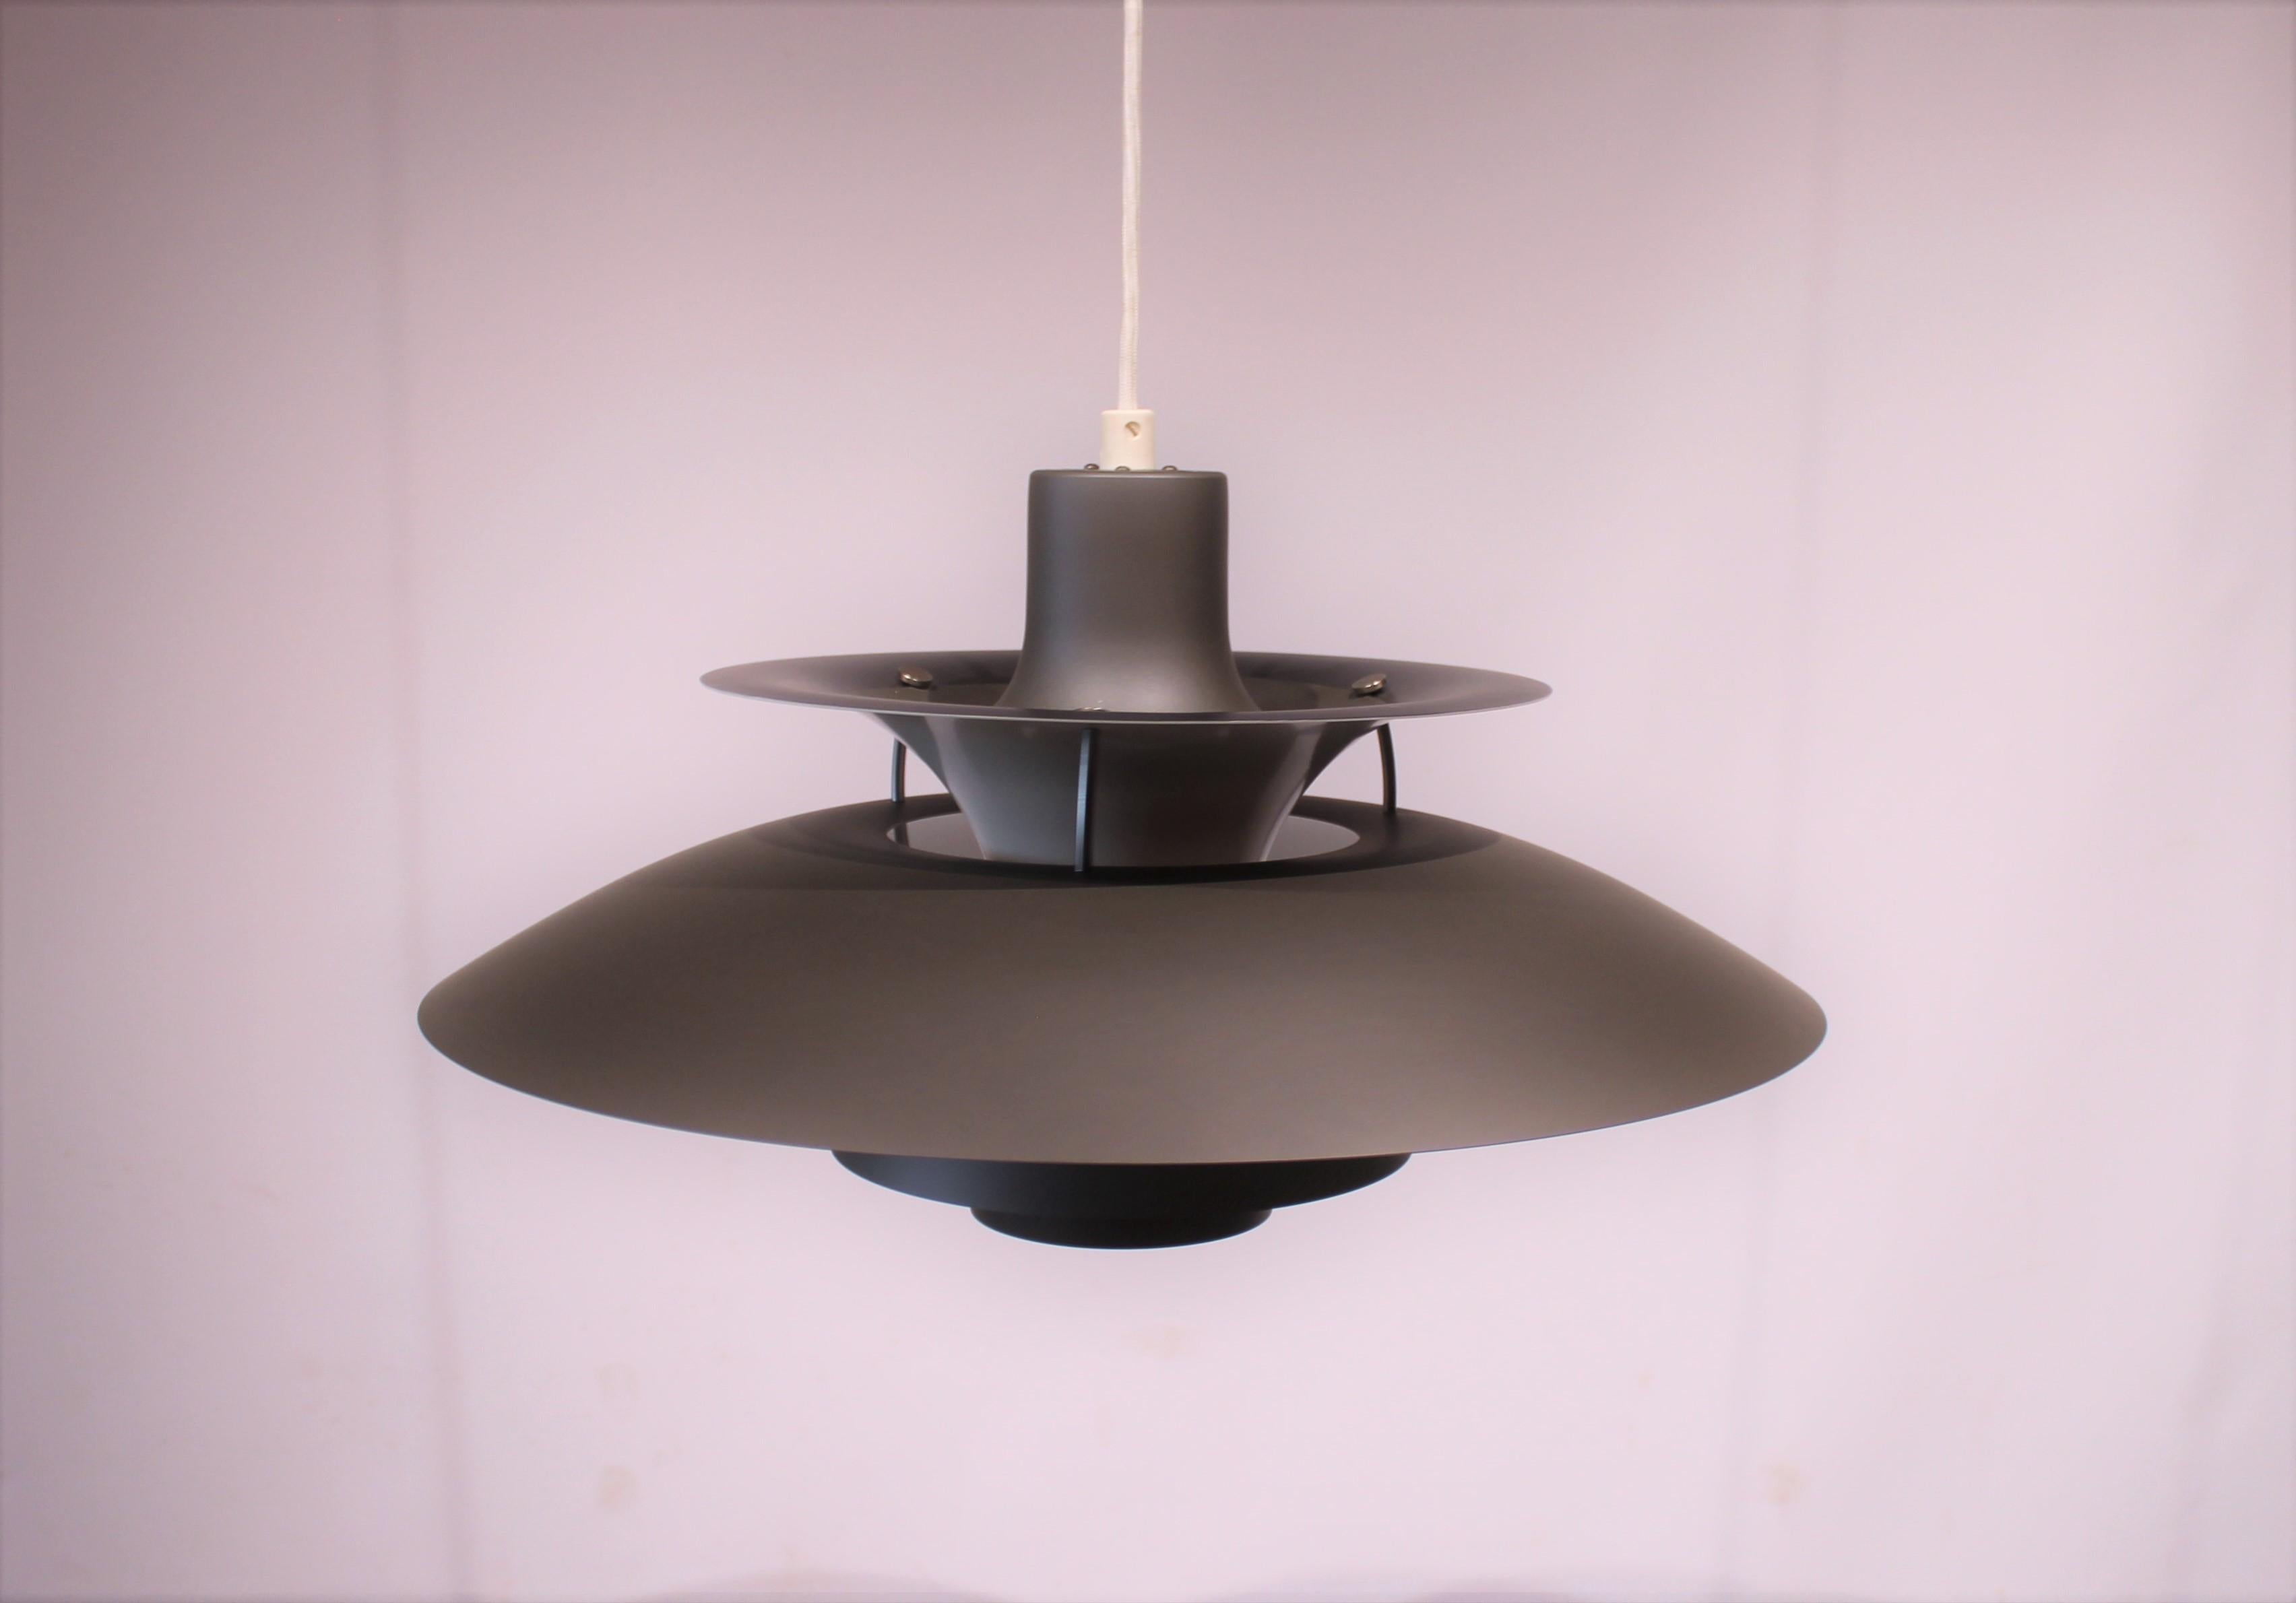 PH5 pendant designed by Poul Henningsen in 1958 and manufactured by Louis Poulsen. The pendant has dark grey lacquered metal shades.